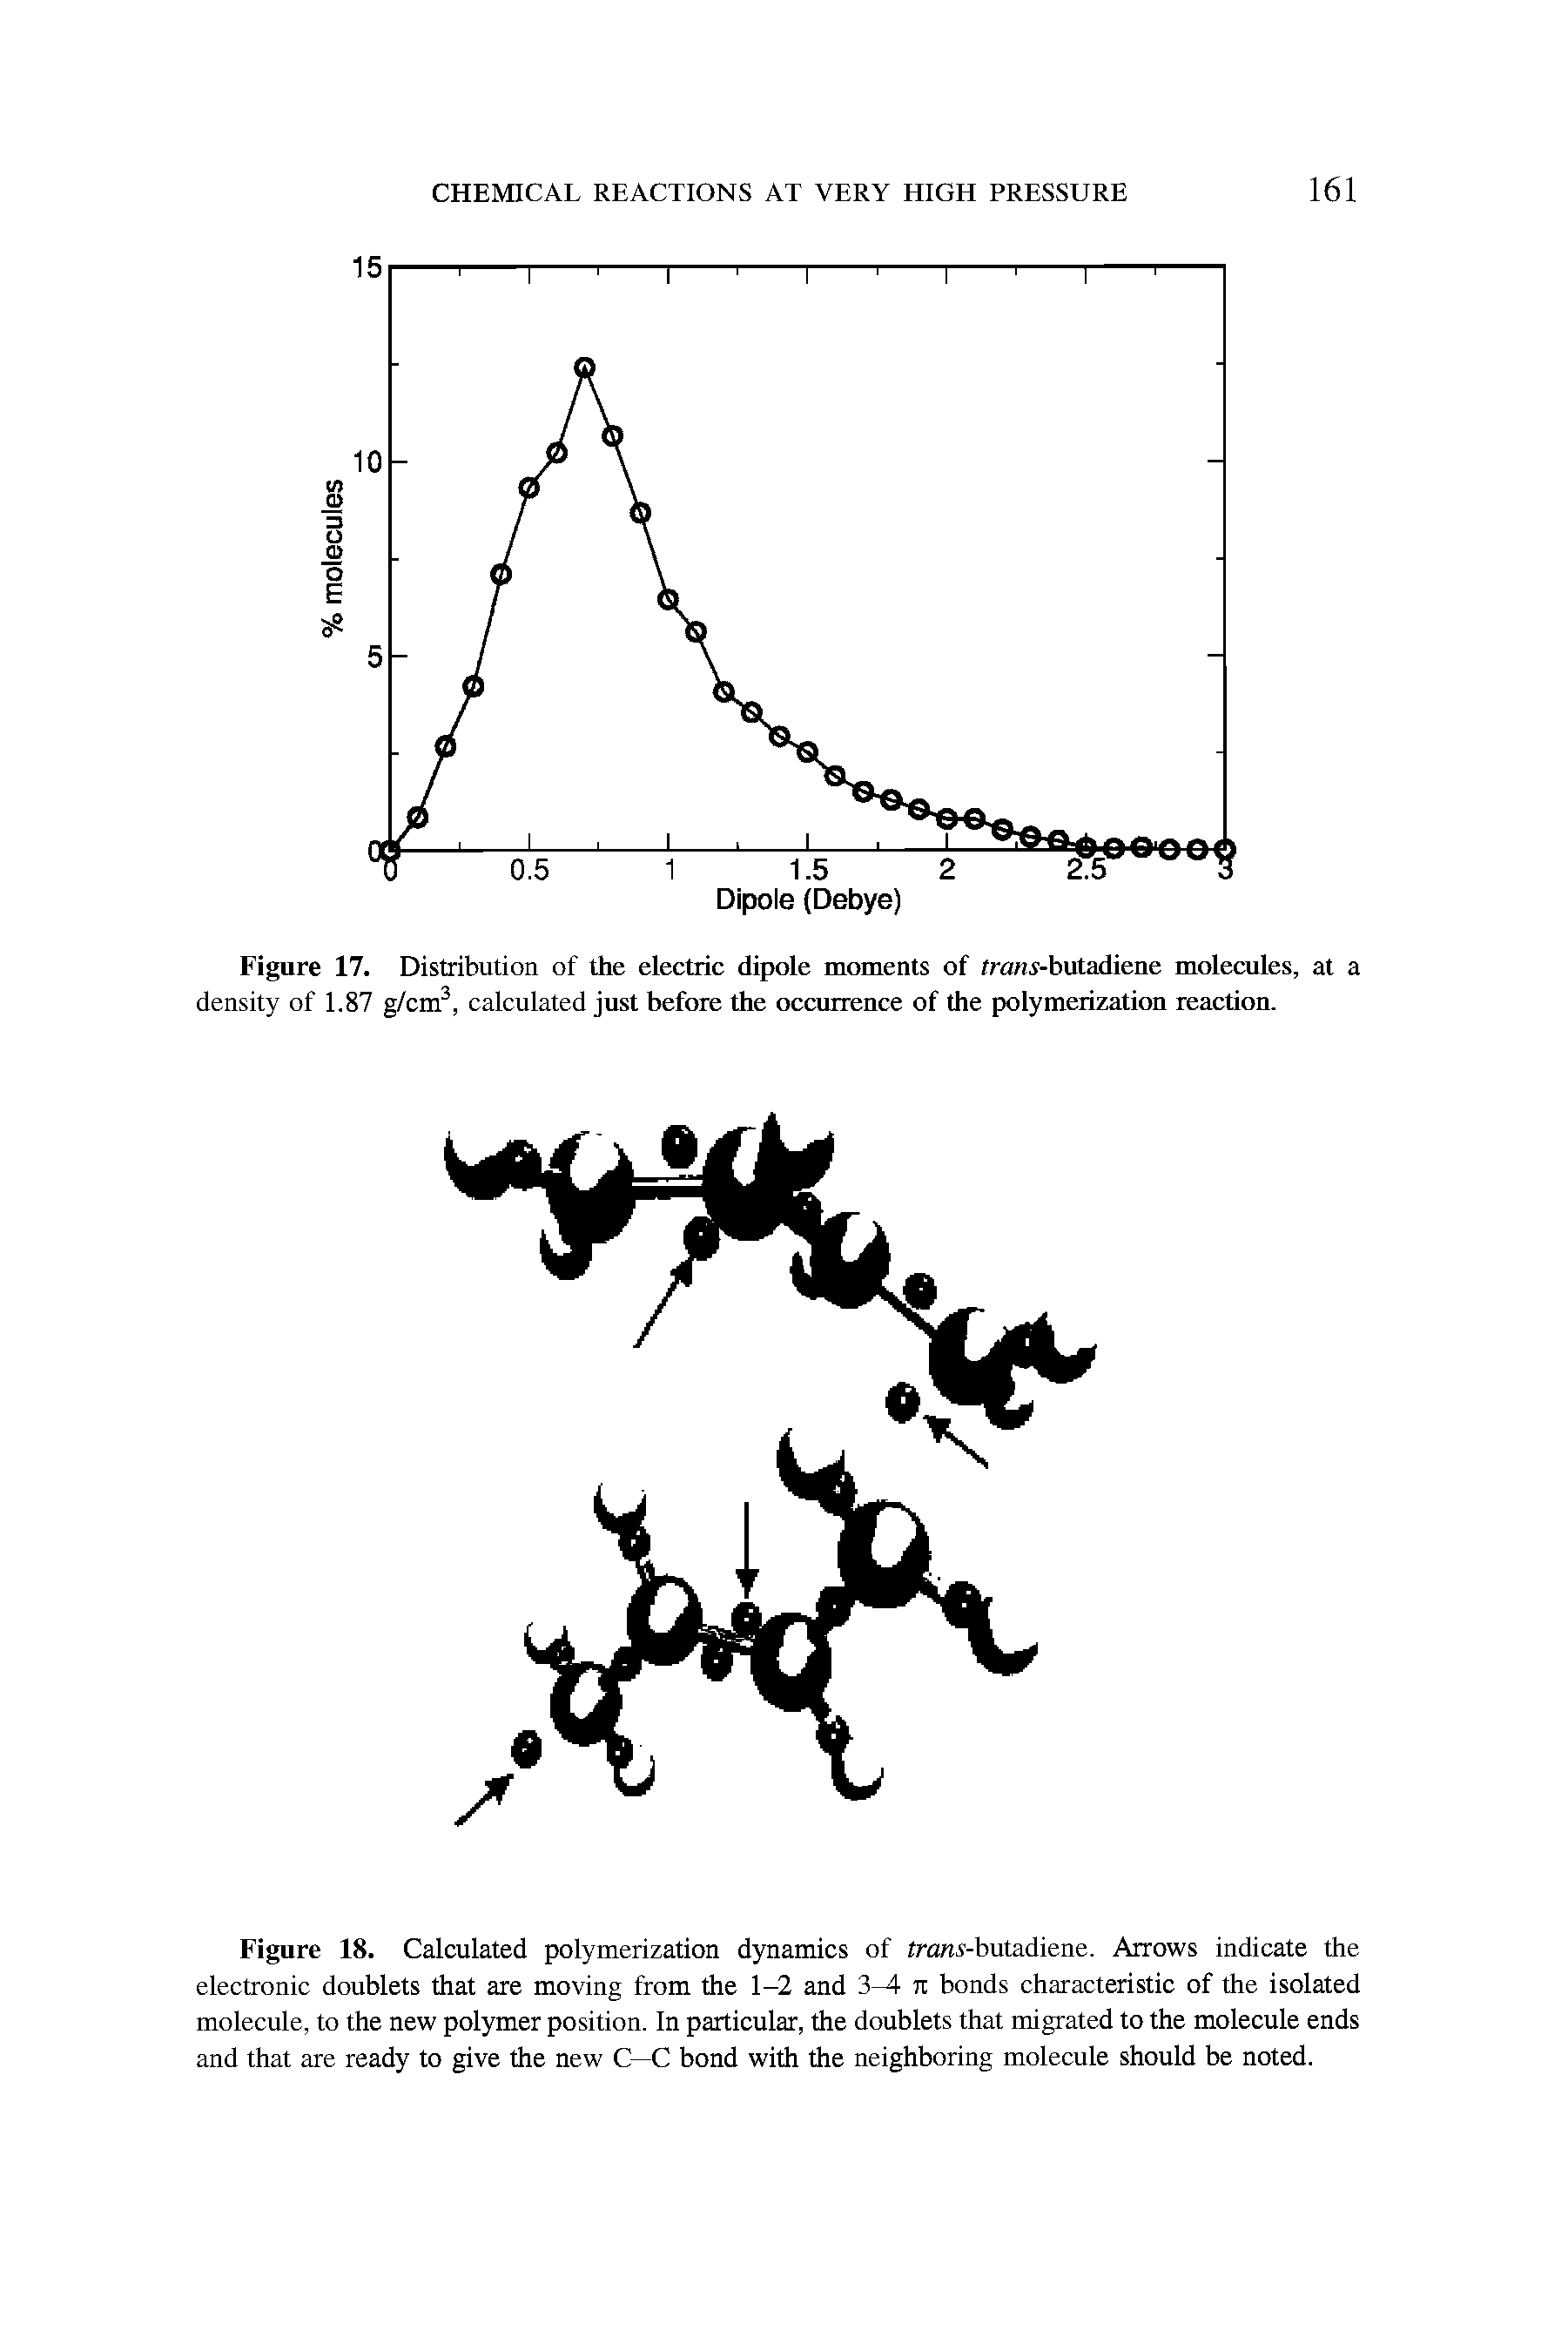 Figure 18. Calculated polymerization dynamics of trcin -butadiene. Arrows indicate the electronic doublets that are moving from the 1-2 and 3 7t bonds characteristic of the isolated molecule, to the new polymer position. In particular, the doublets that migrated to the molecule ends and that are ready to give the new C—C bond with the neighboring molecule should be noted.